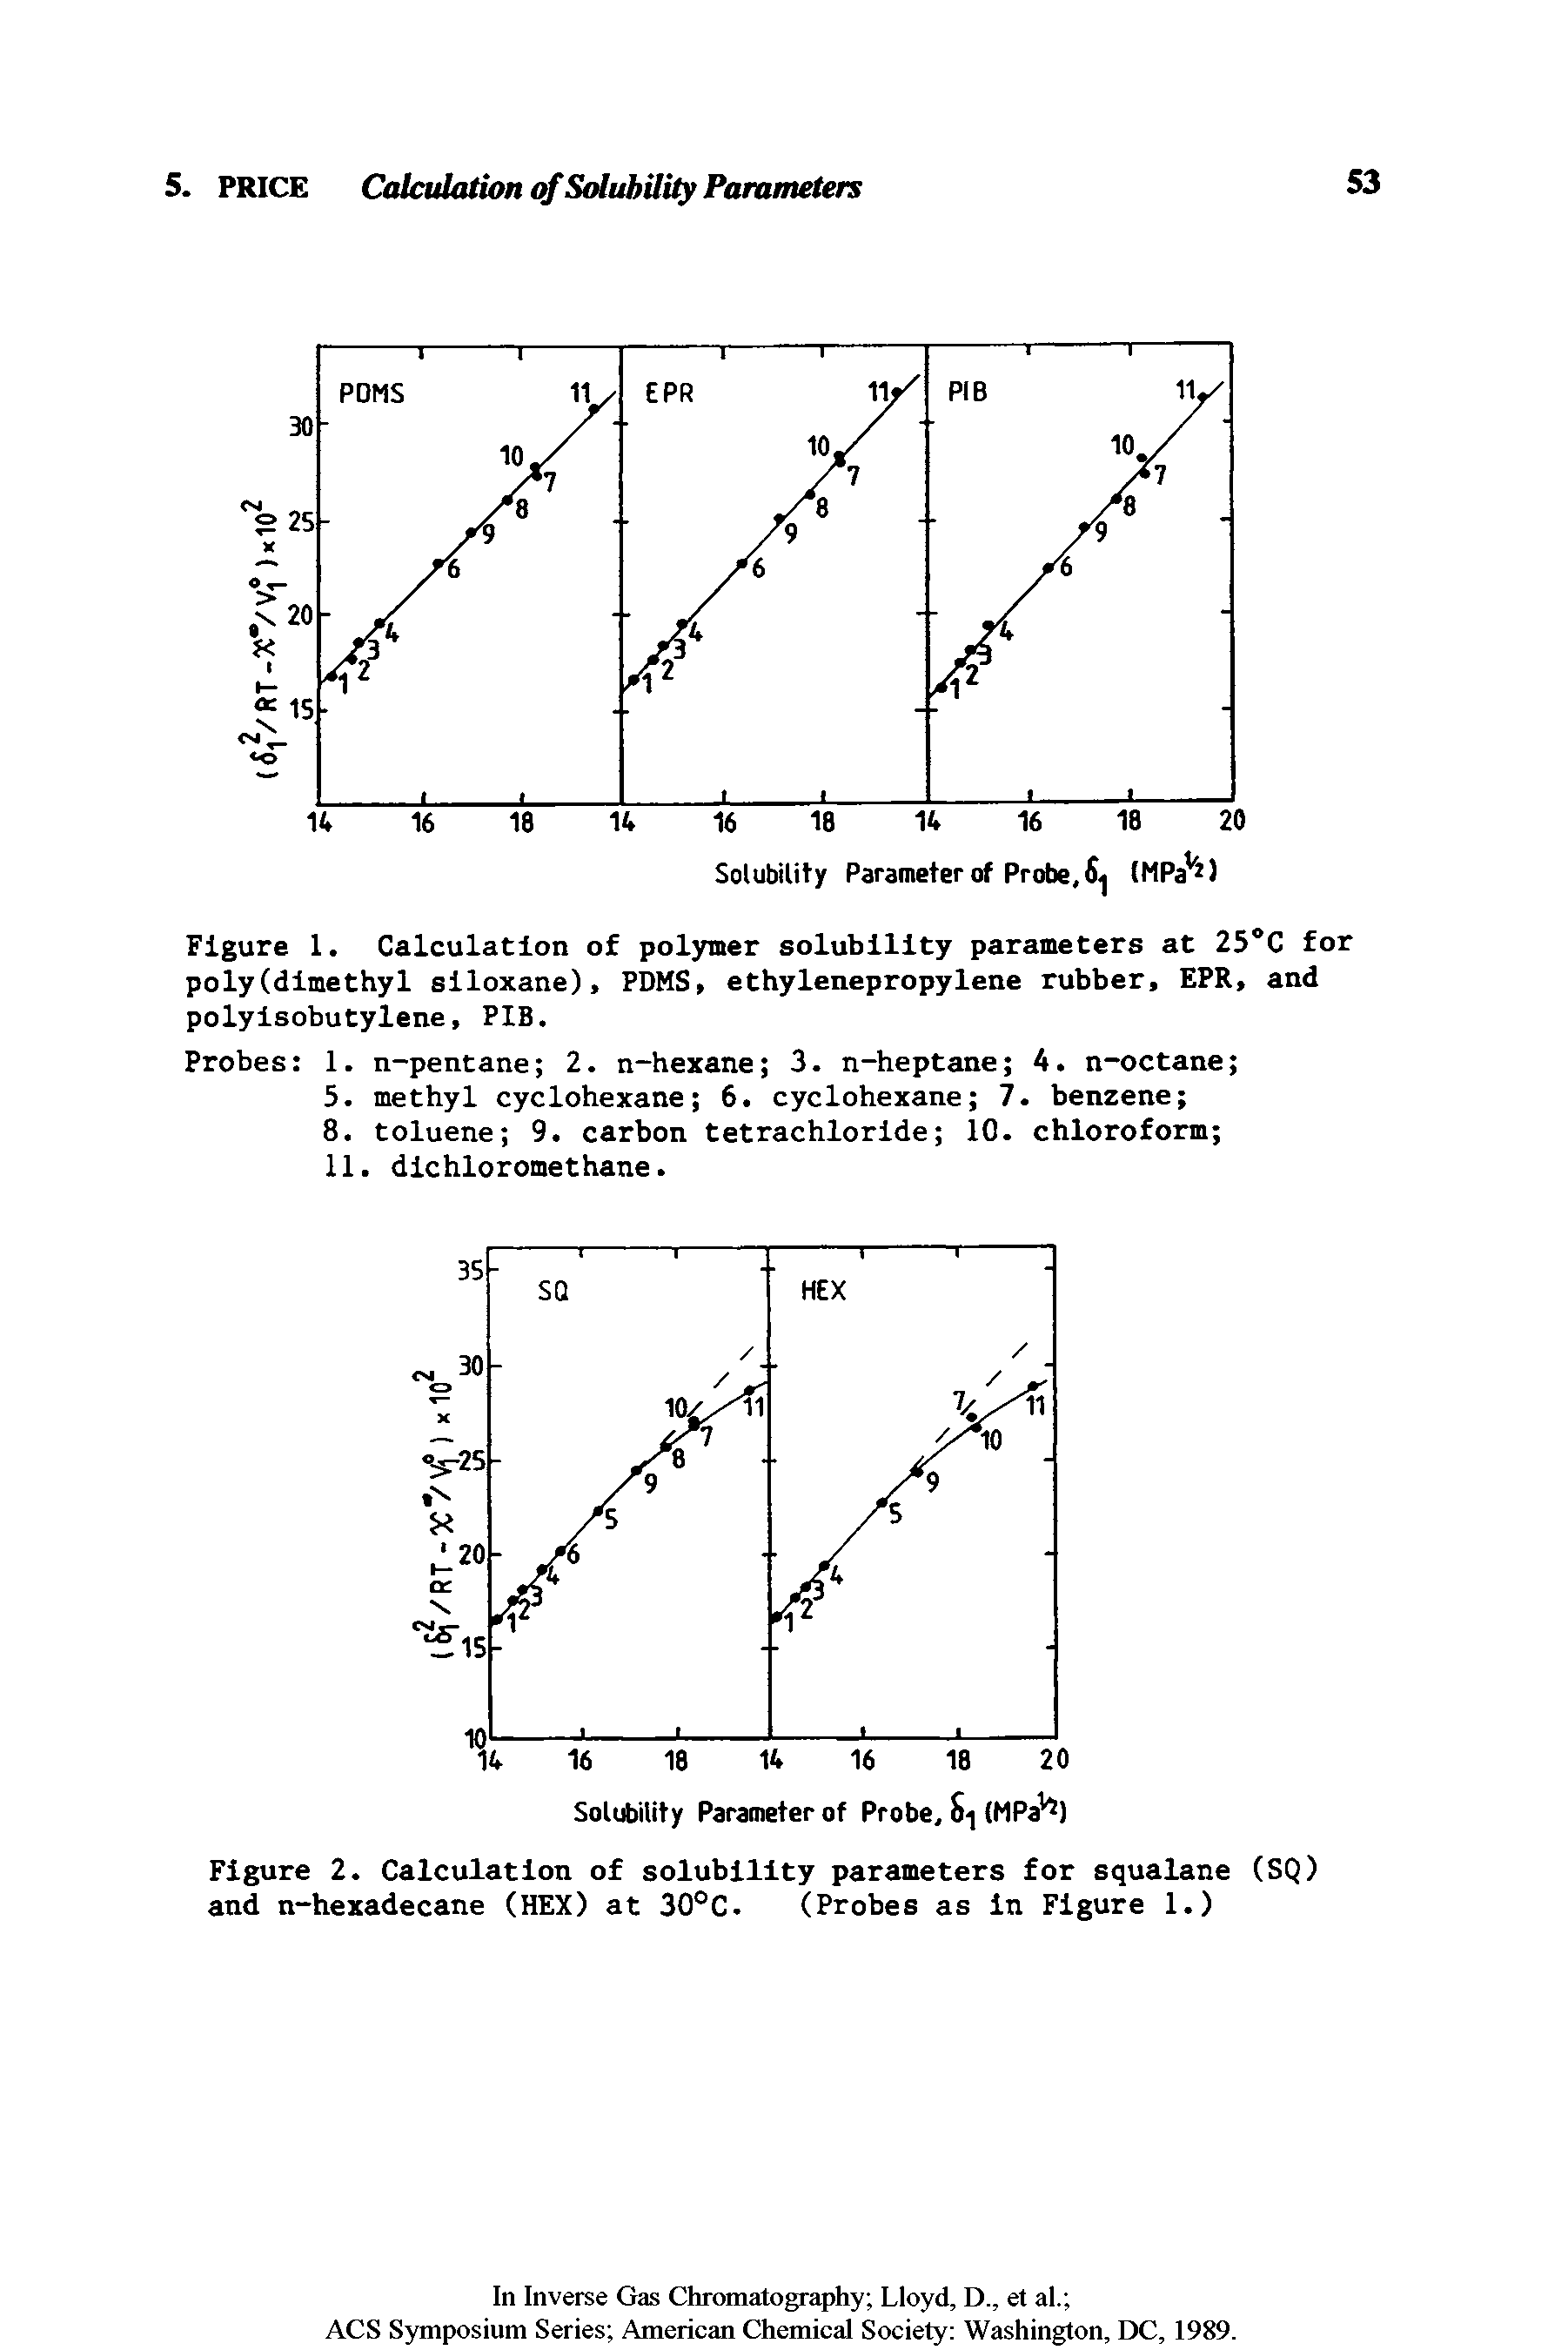 Figure 2. Calculation of solubility parameters for squalane (SQ) and n-hexadecane (HEX) at 30°C. (Probes as in Figure 1.)...